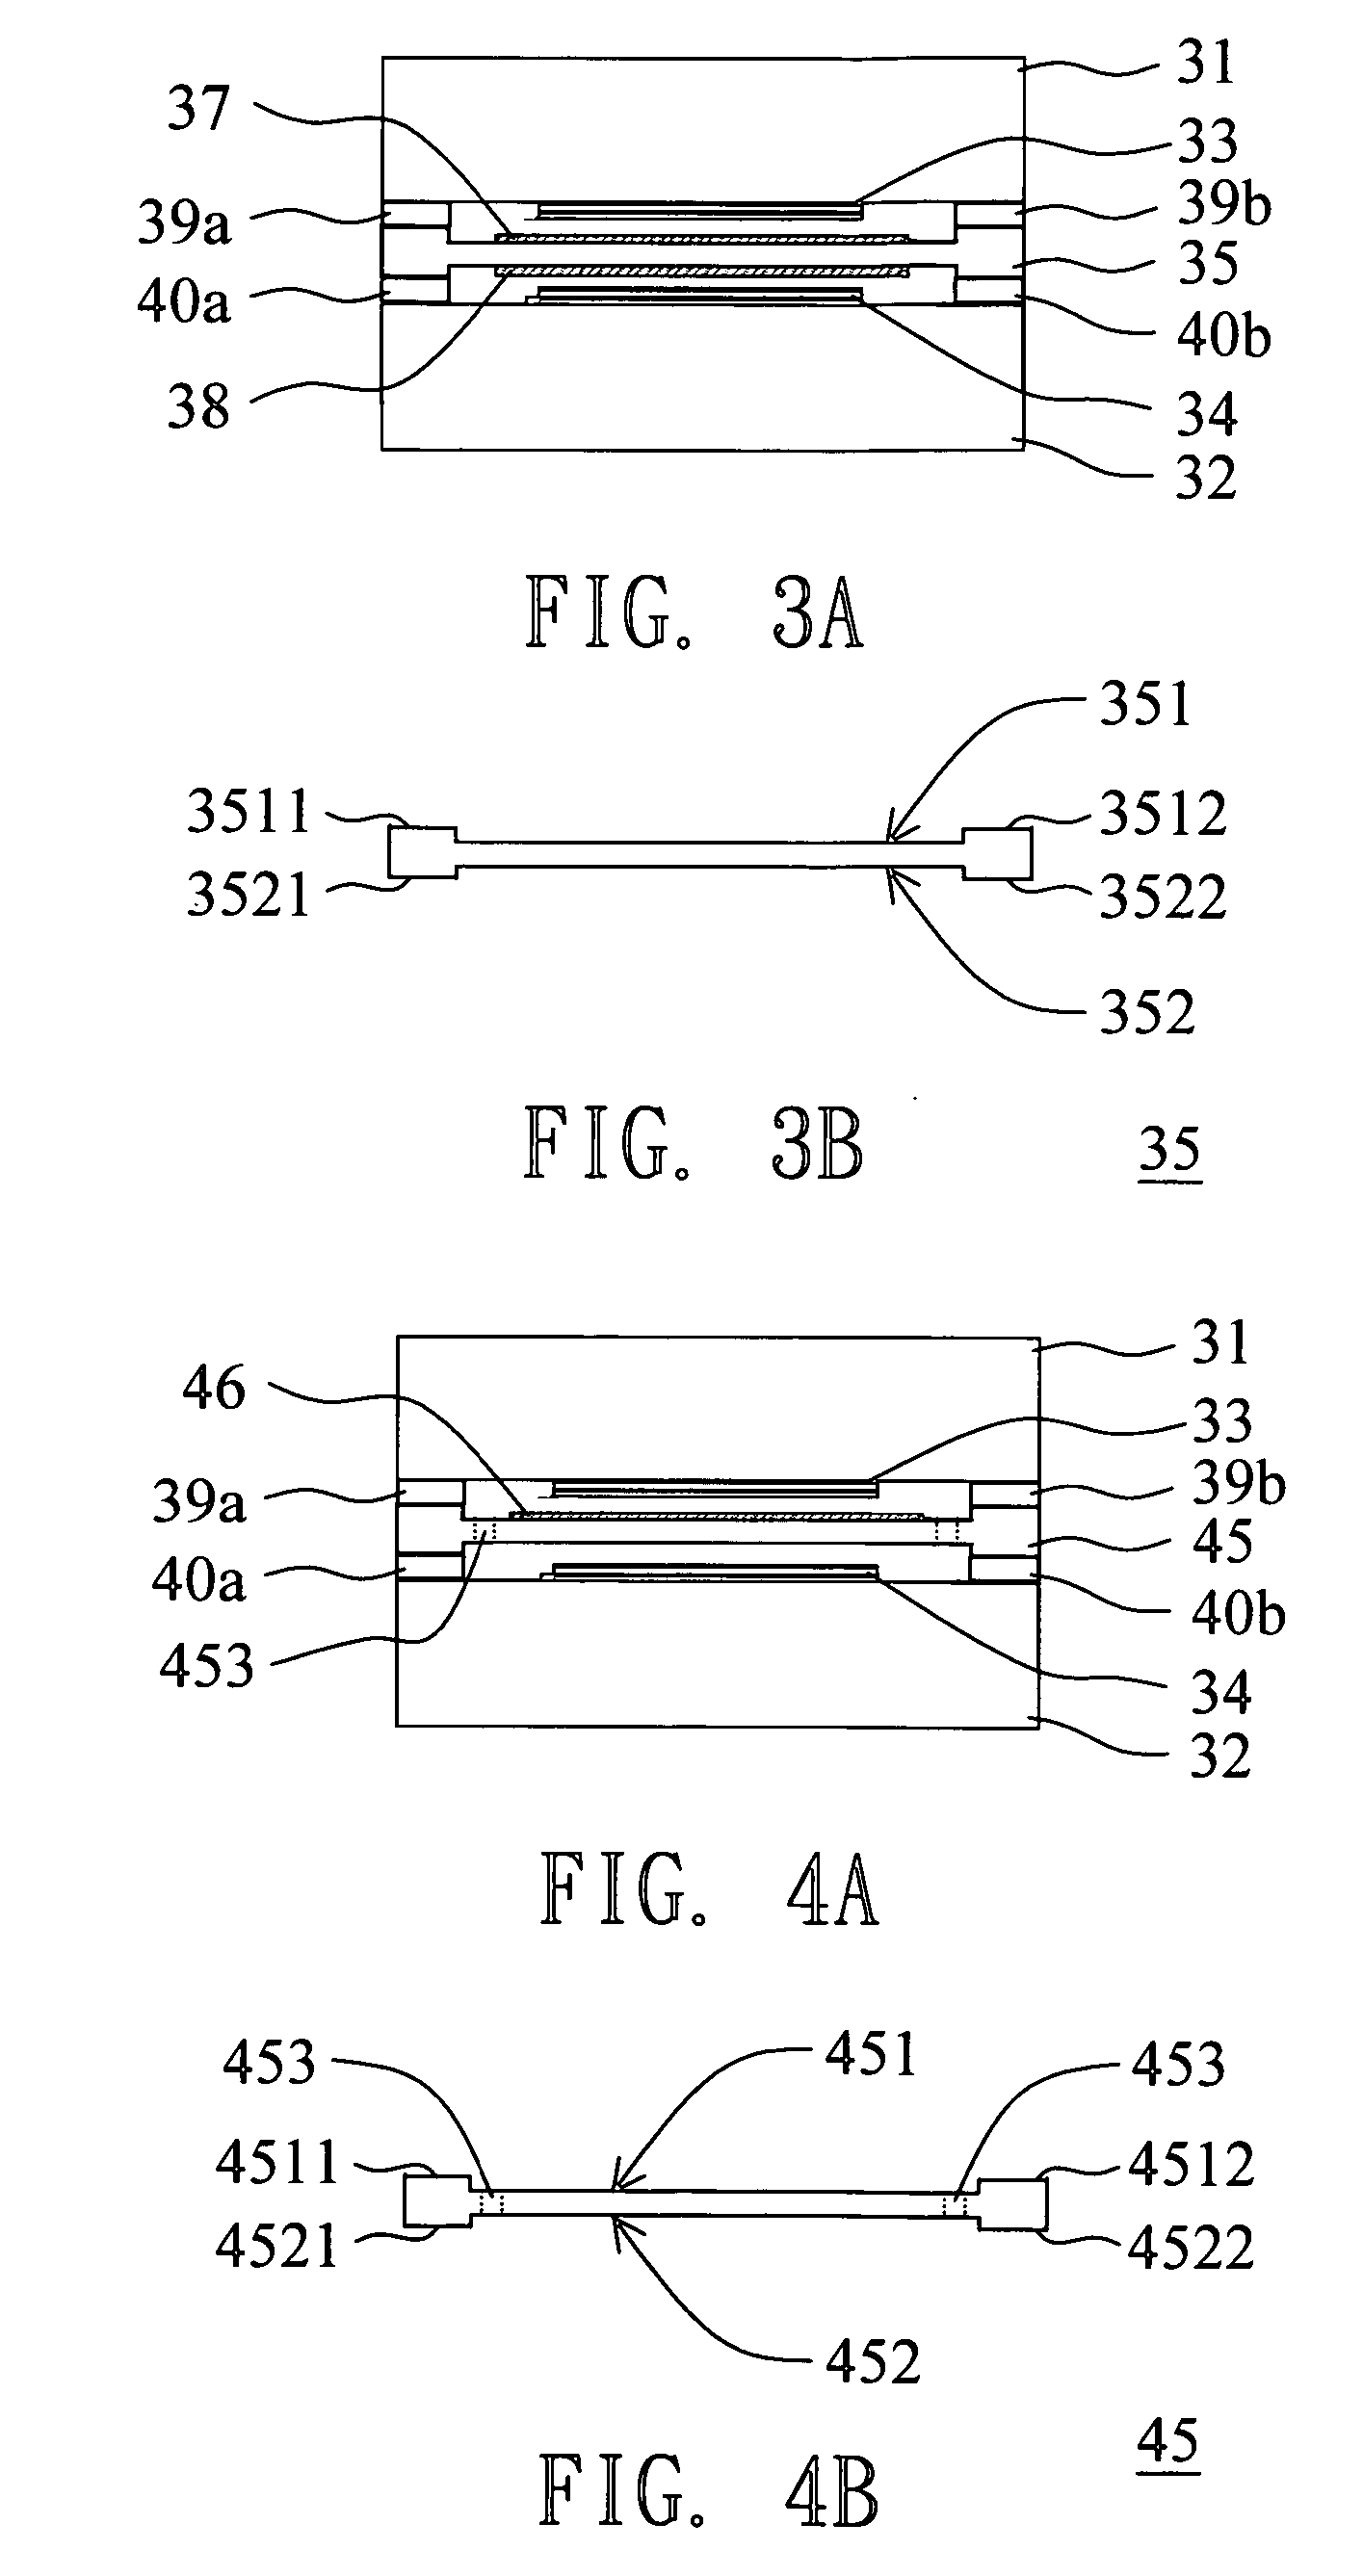 Encapsulation structure of double sided organic light emitting device and method of fabricating the same